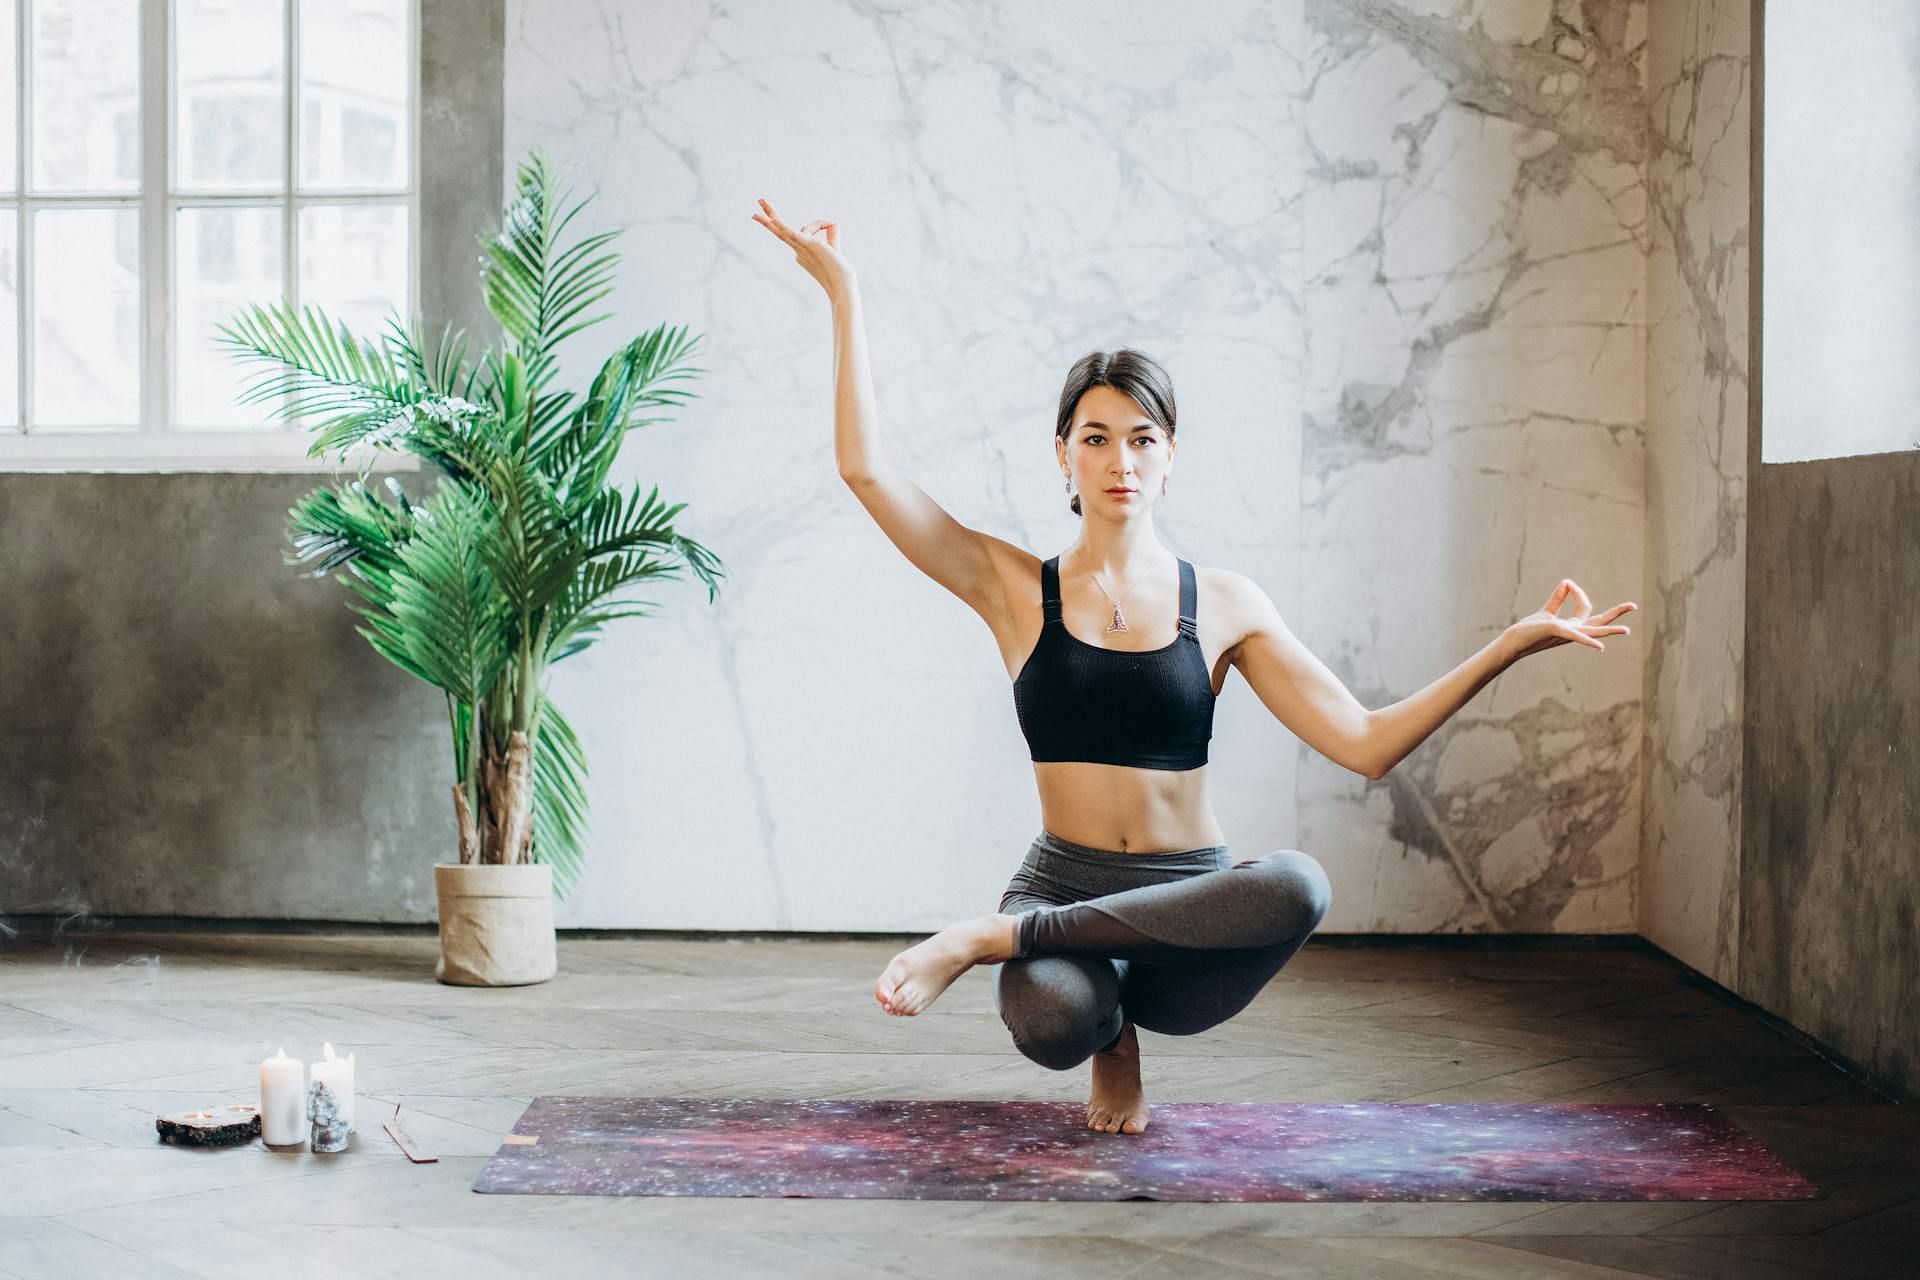 Yoga helps in integrating body, mind and spirit and offers a unique physical experience. (Image via Pexels / Elina Fairytale))